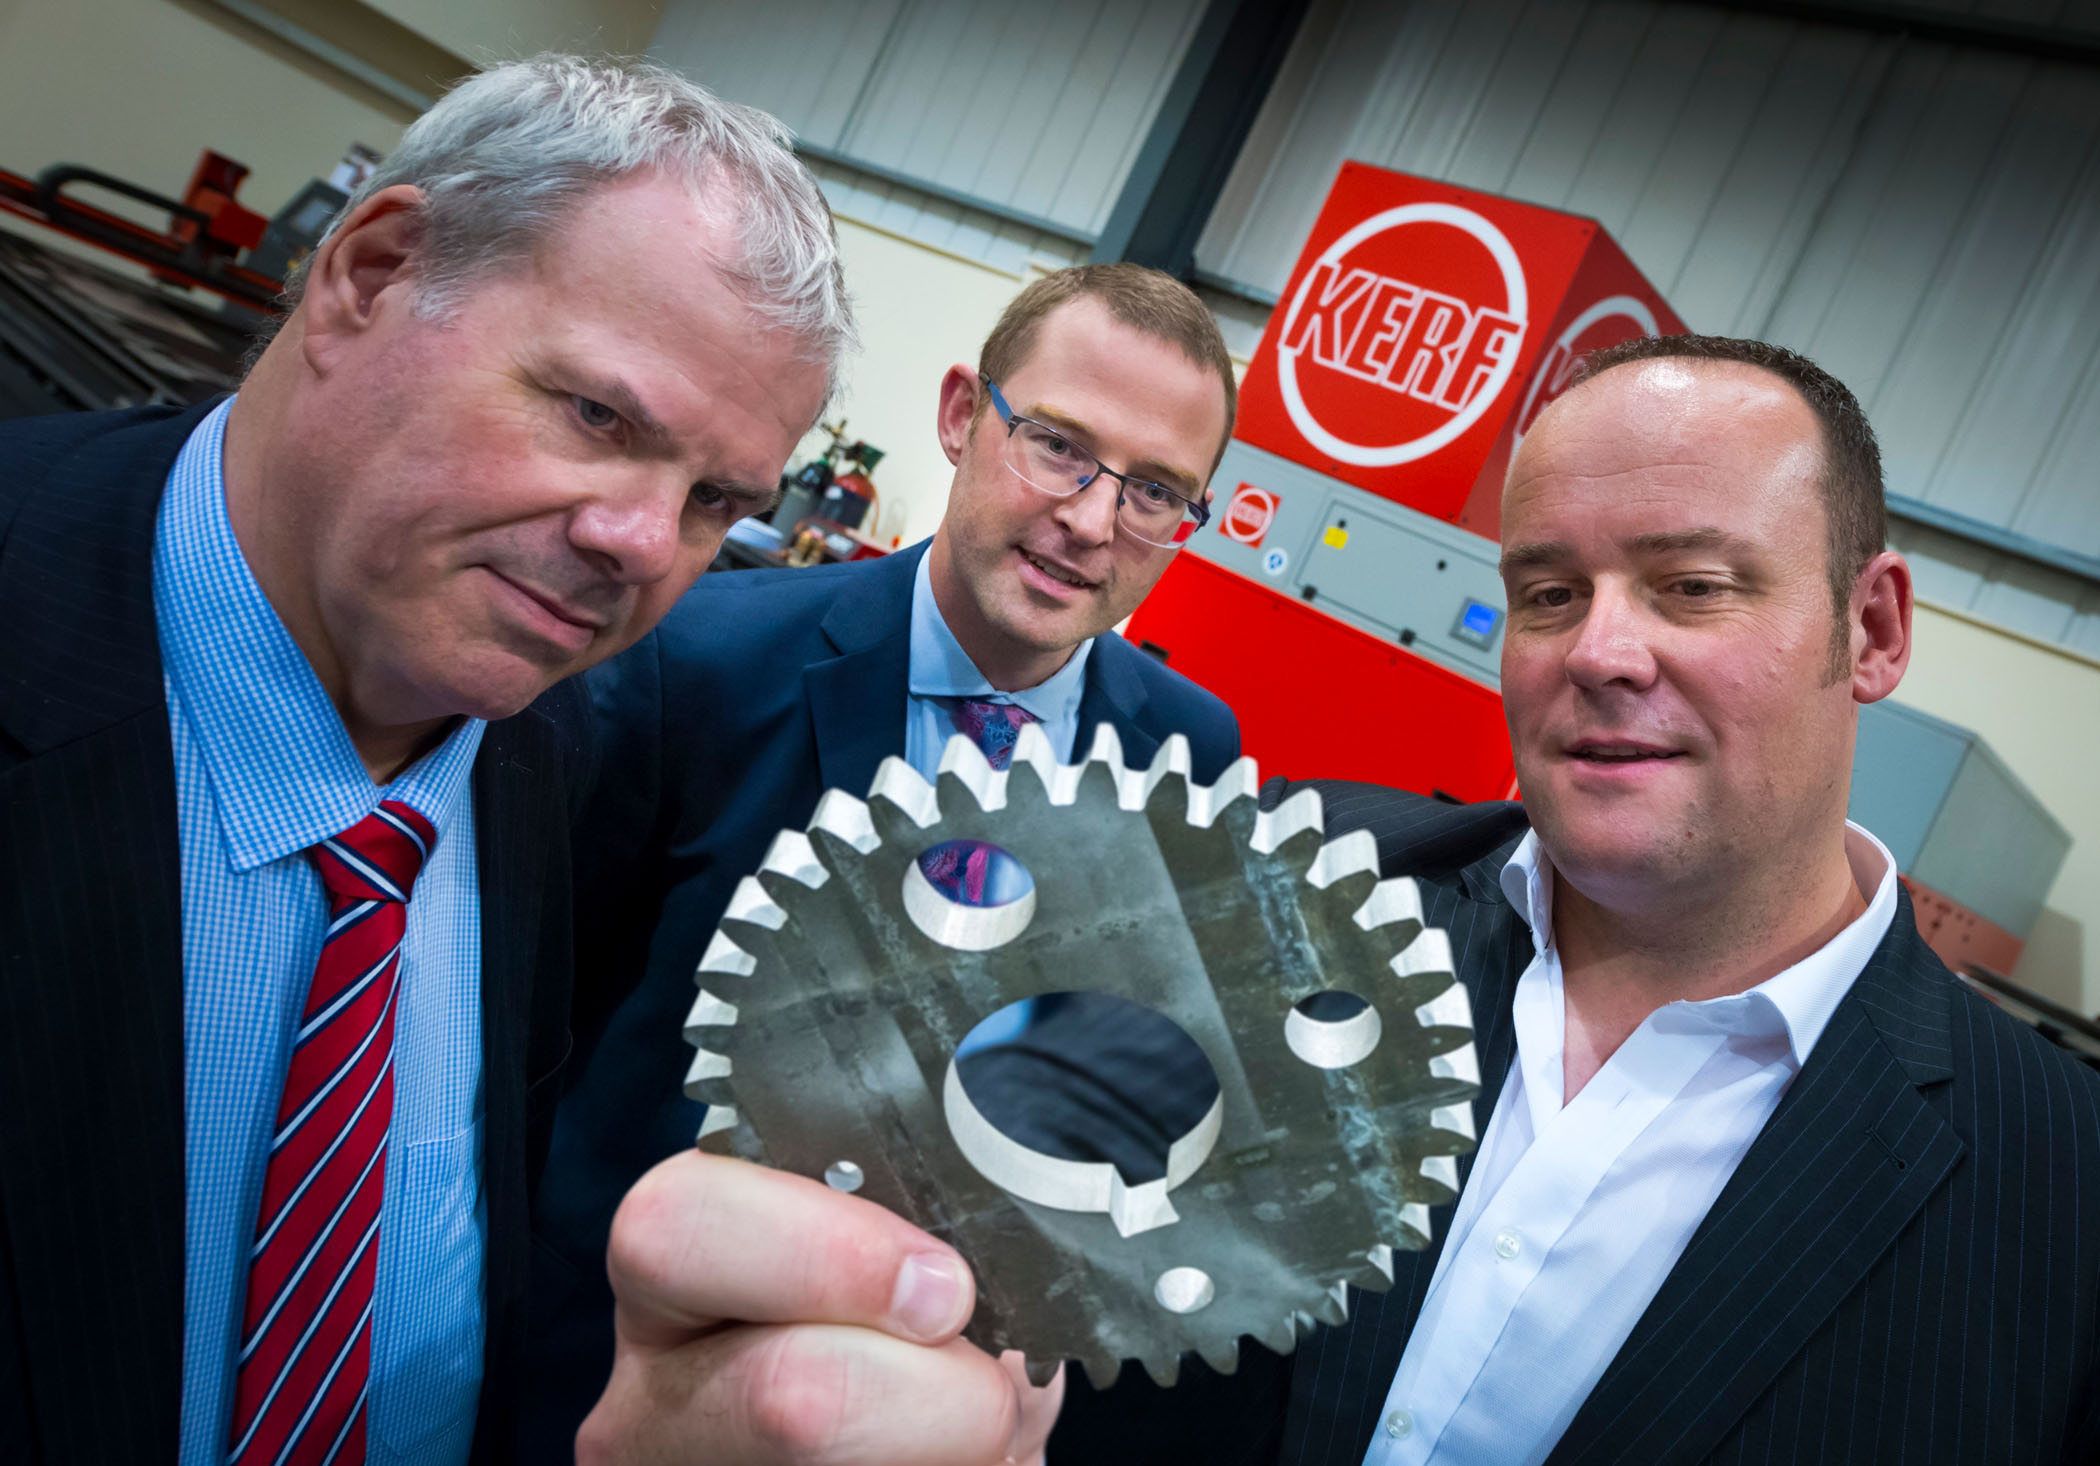 Image: Steely determination: local metal cutting company booming following council grant